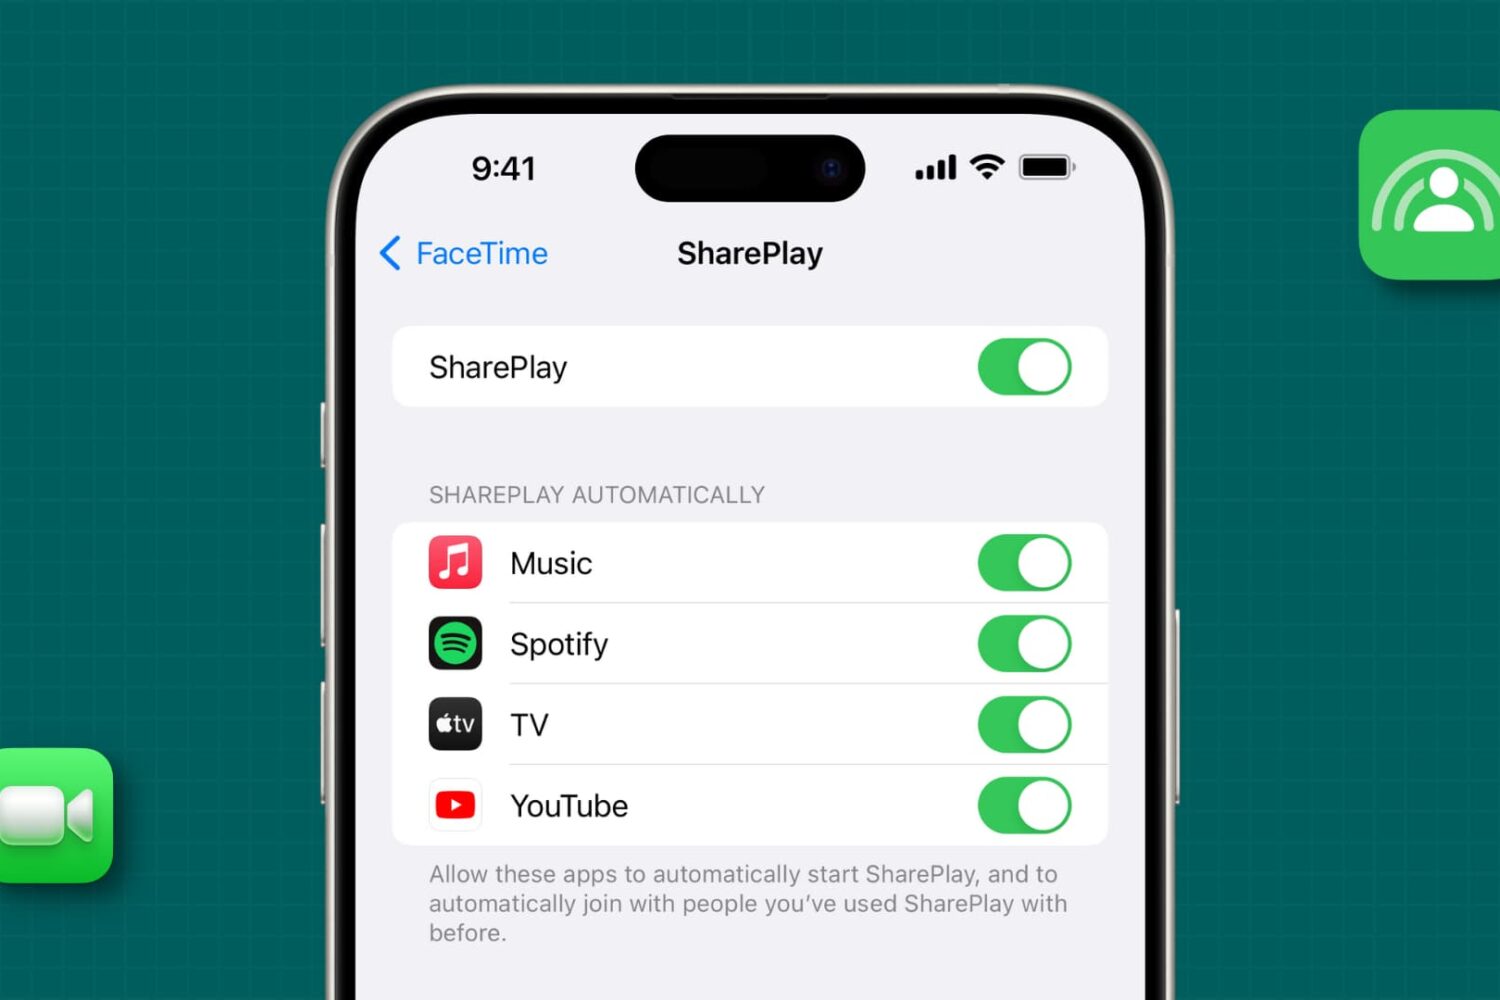 SharePlay in FaceTime settings on iPhone